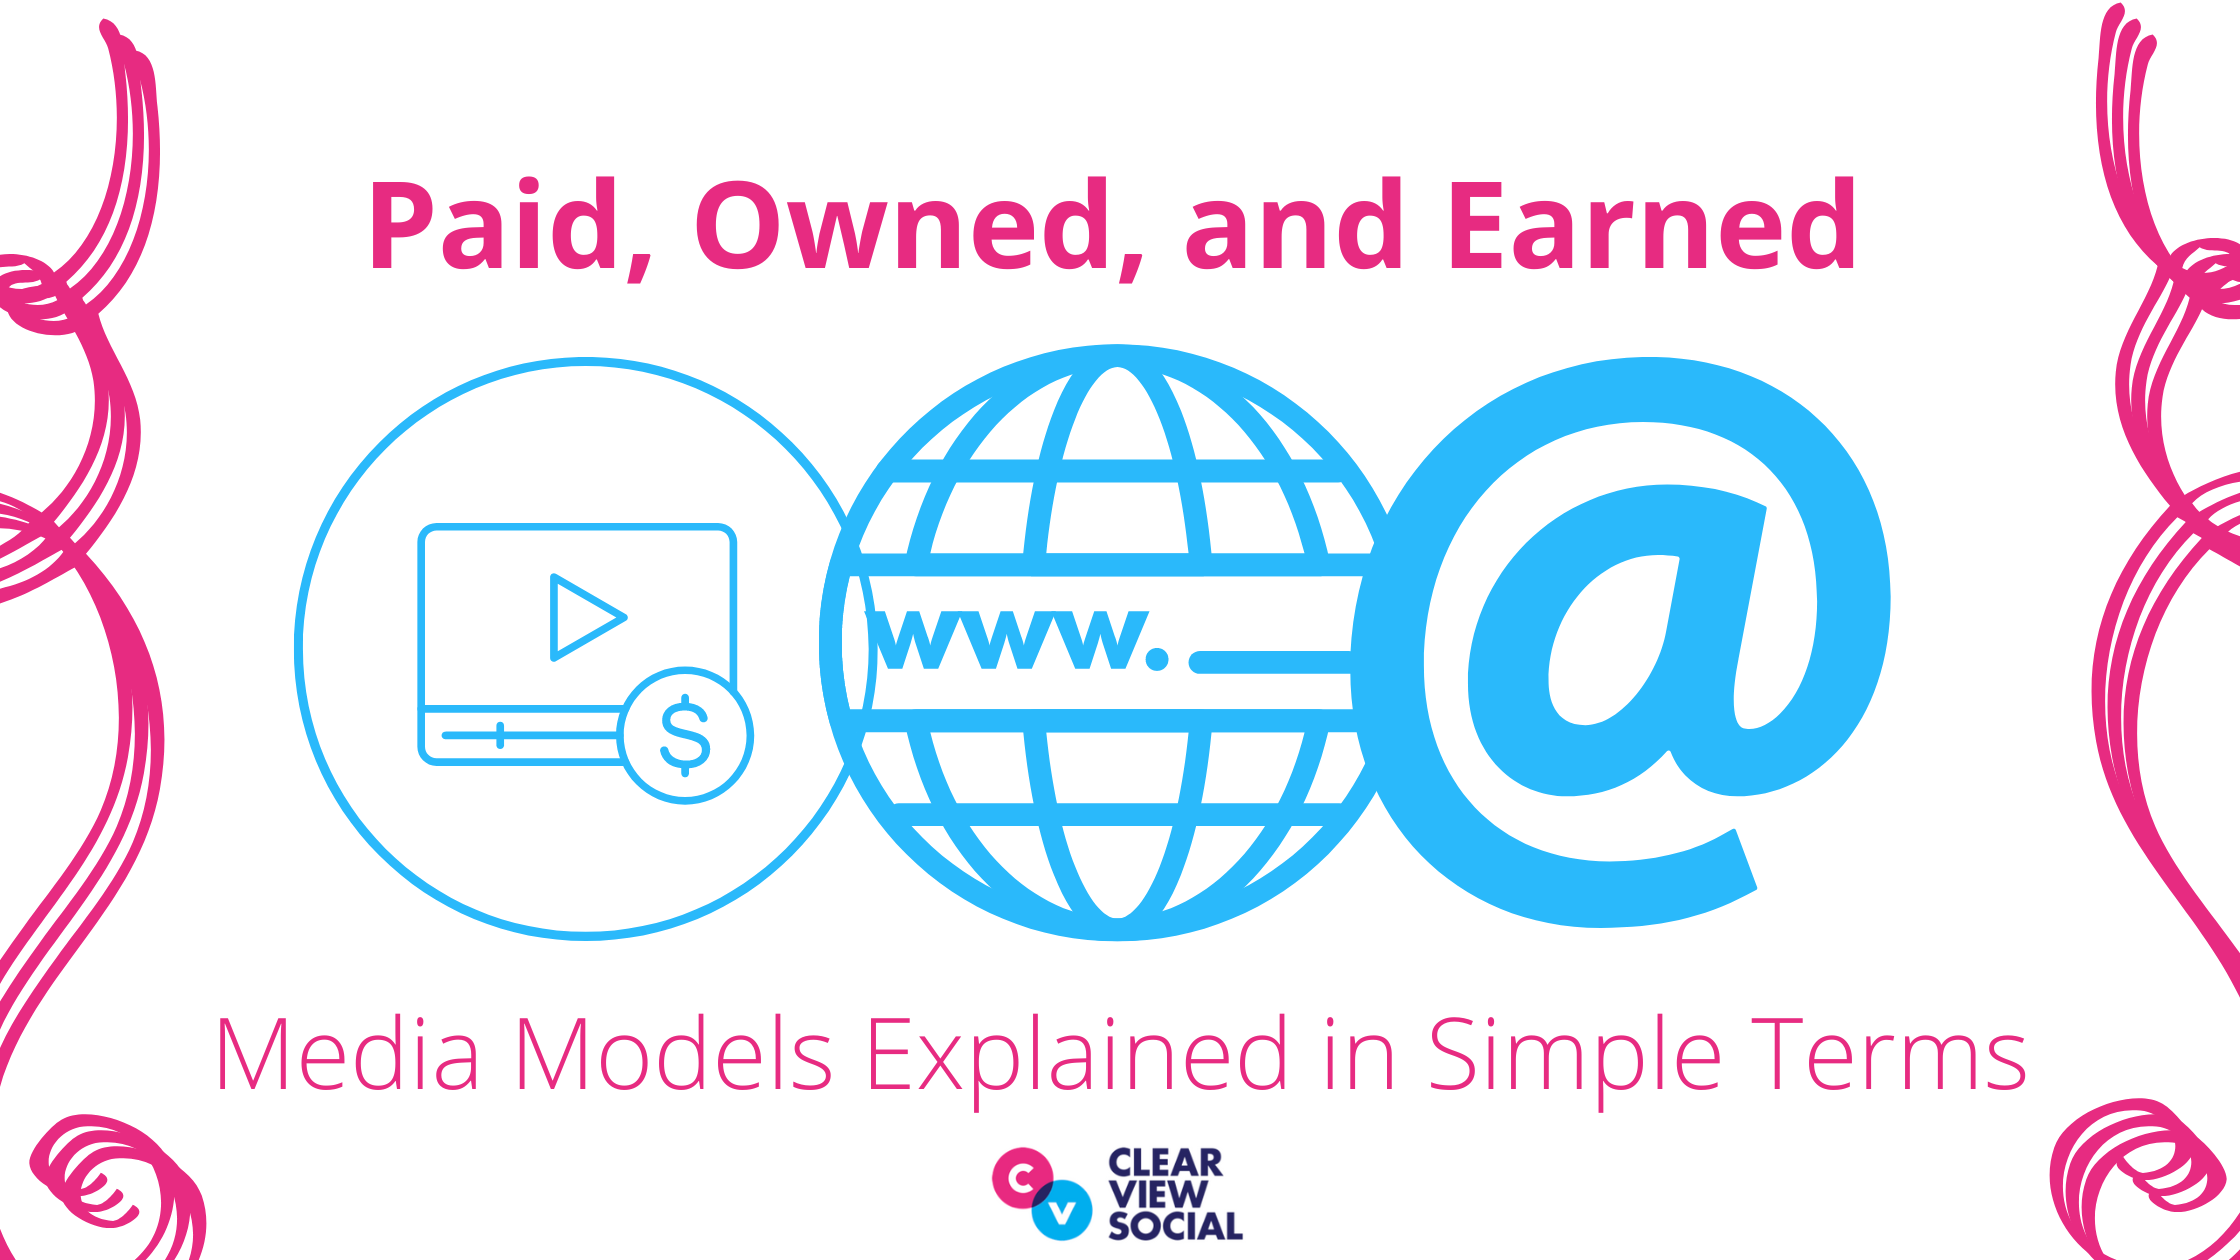 Paid, owned and earned media models explained in simple terms 